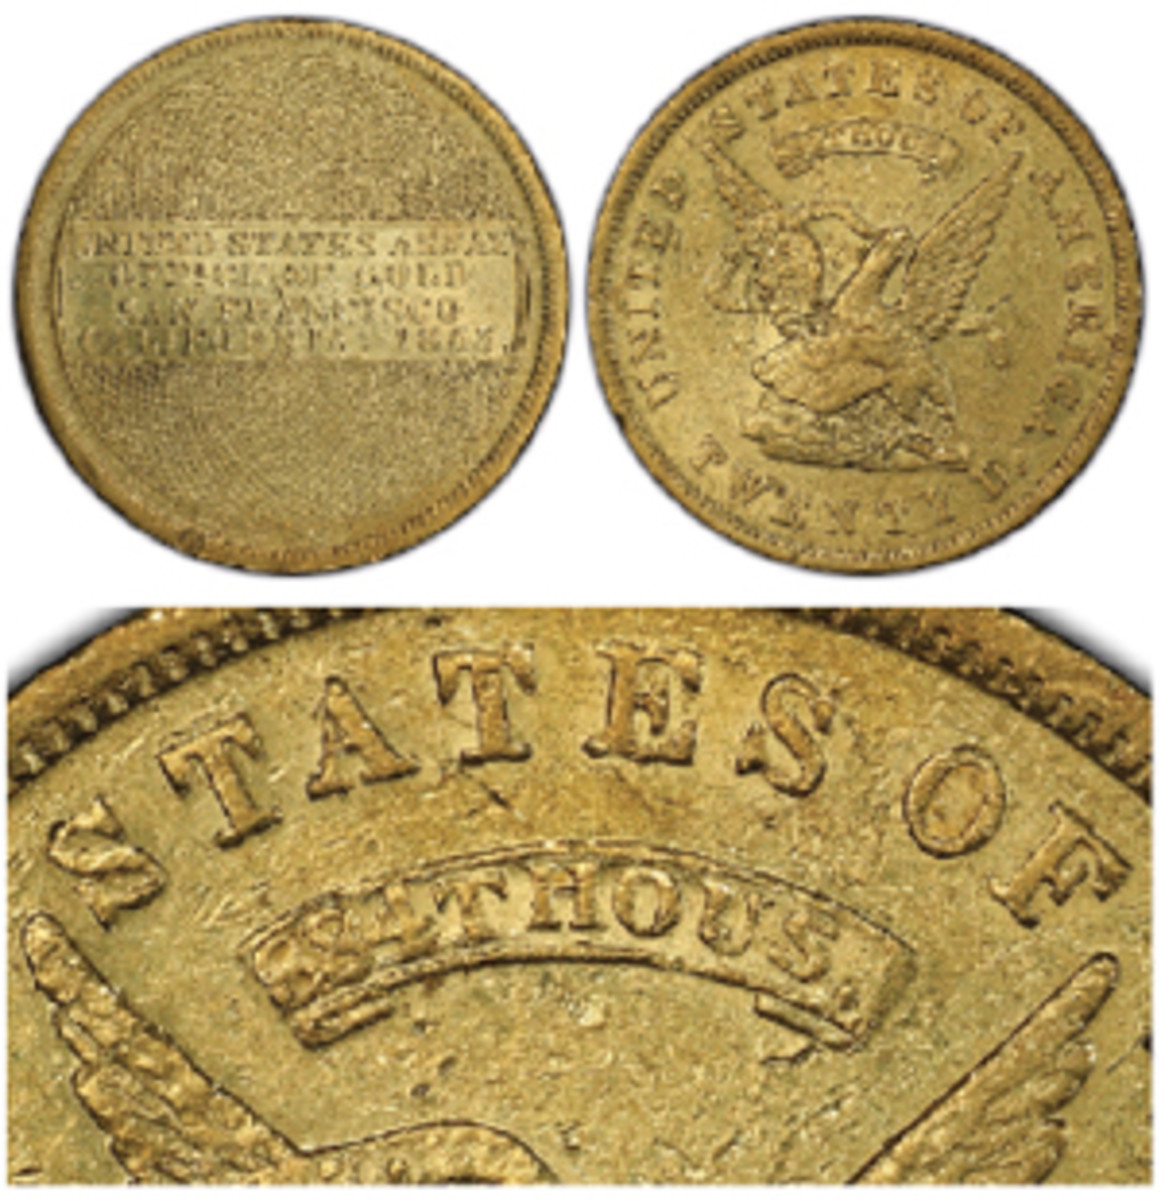 ss central america gold coins